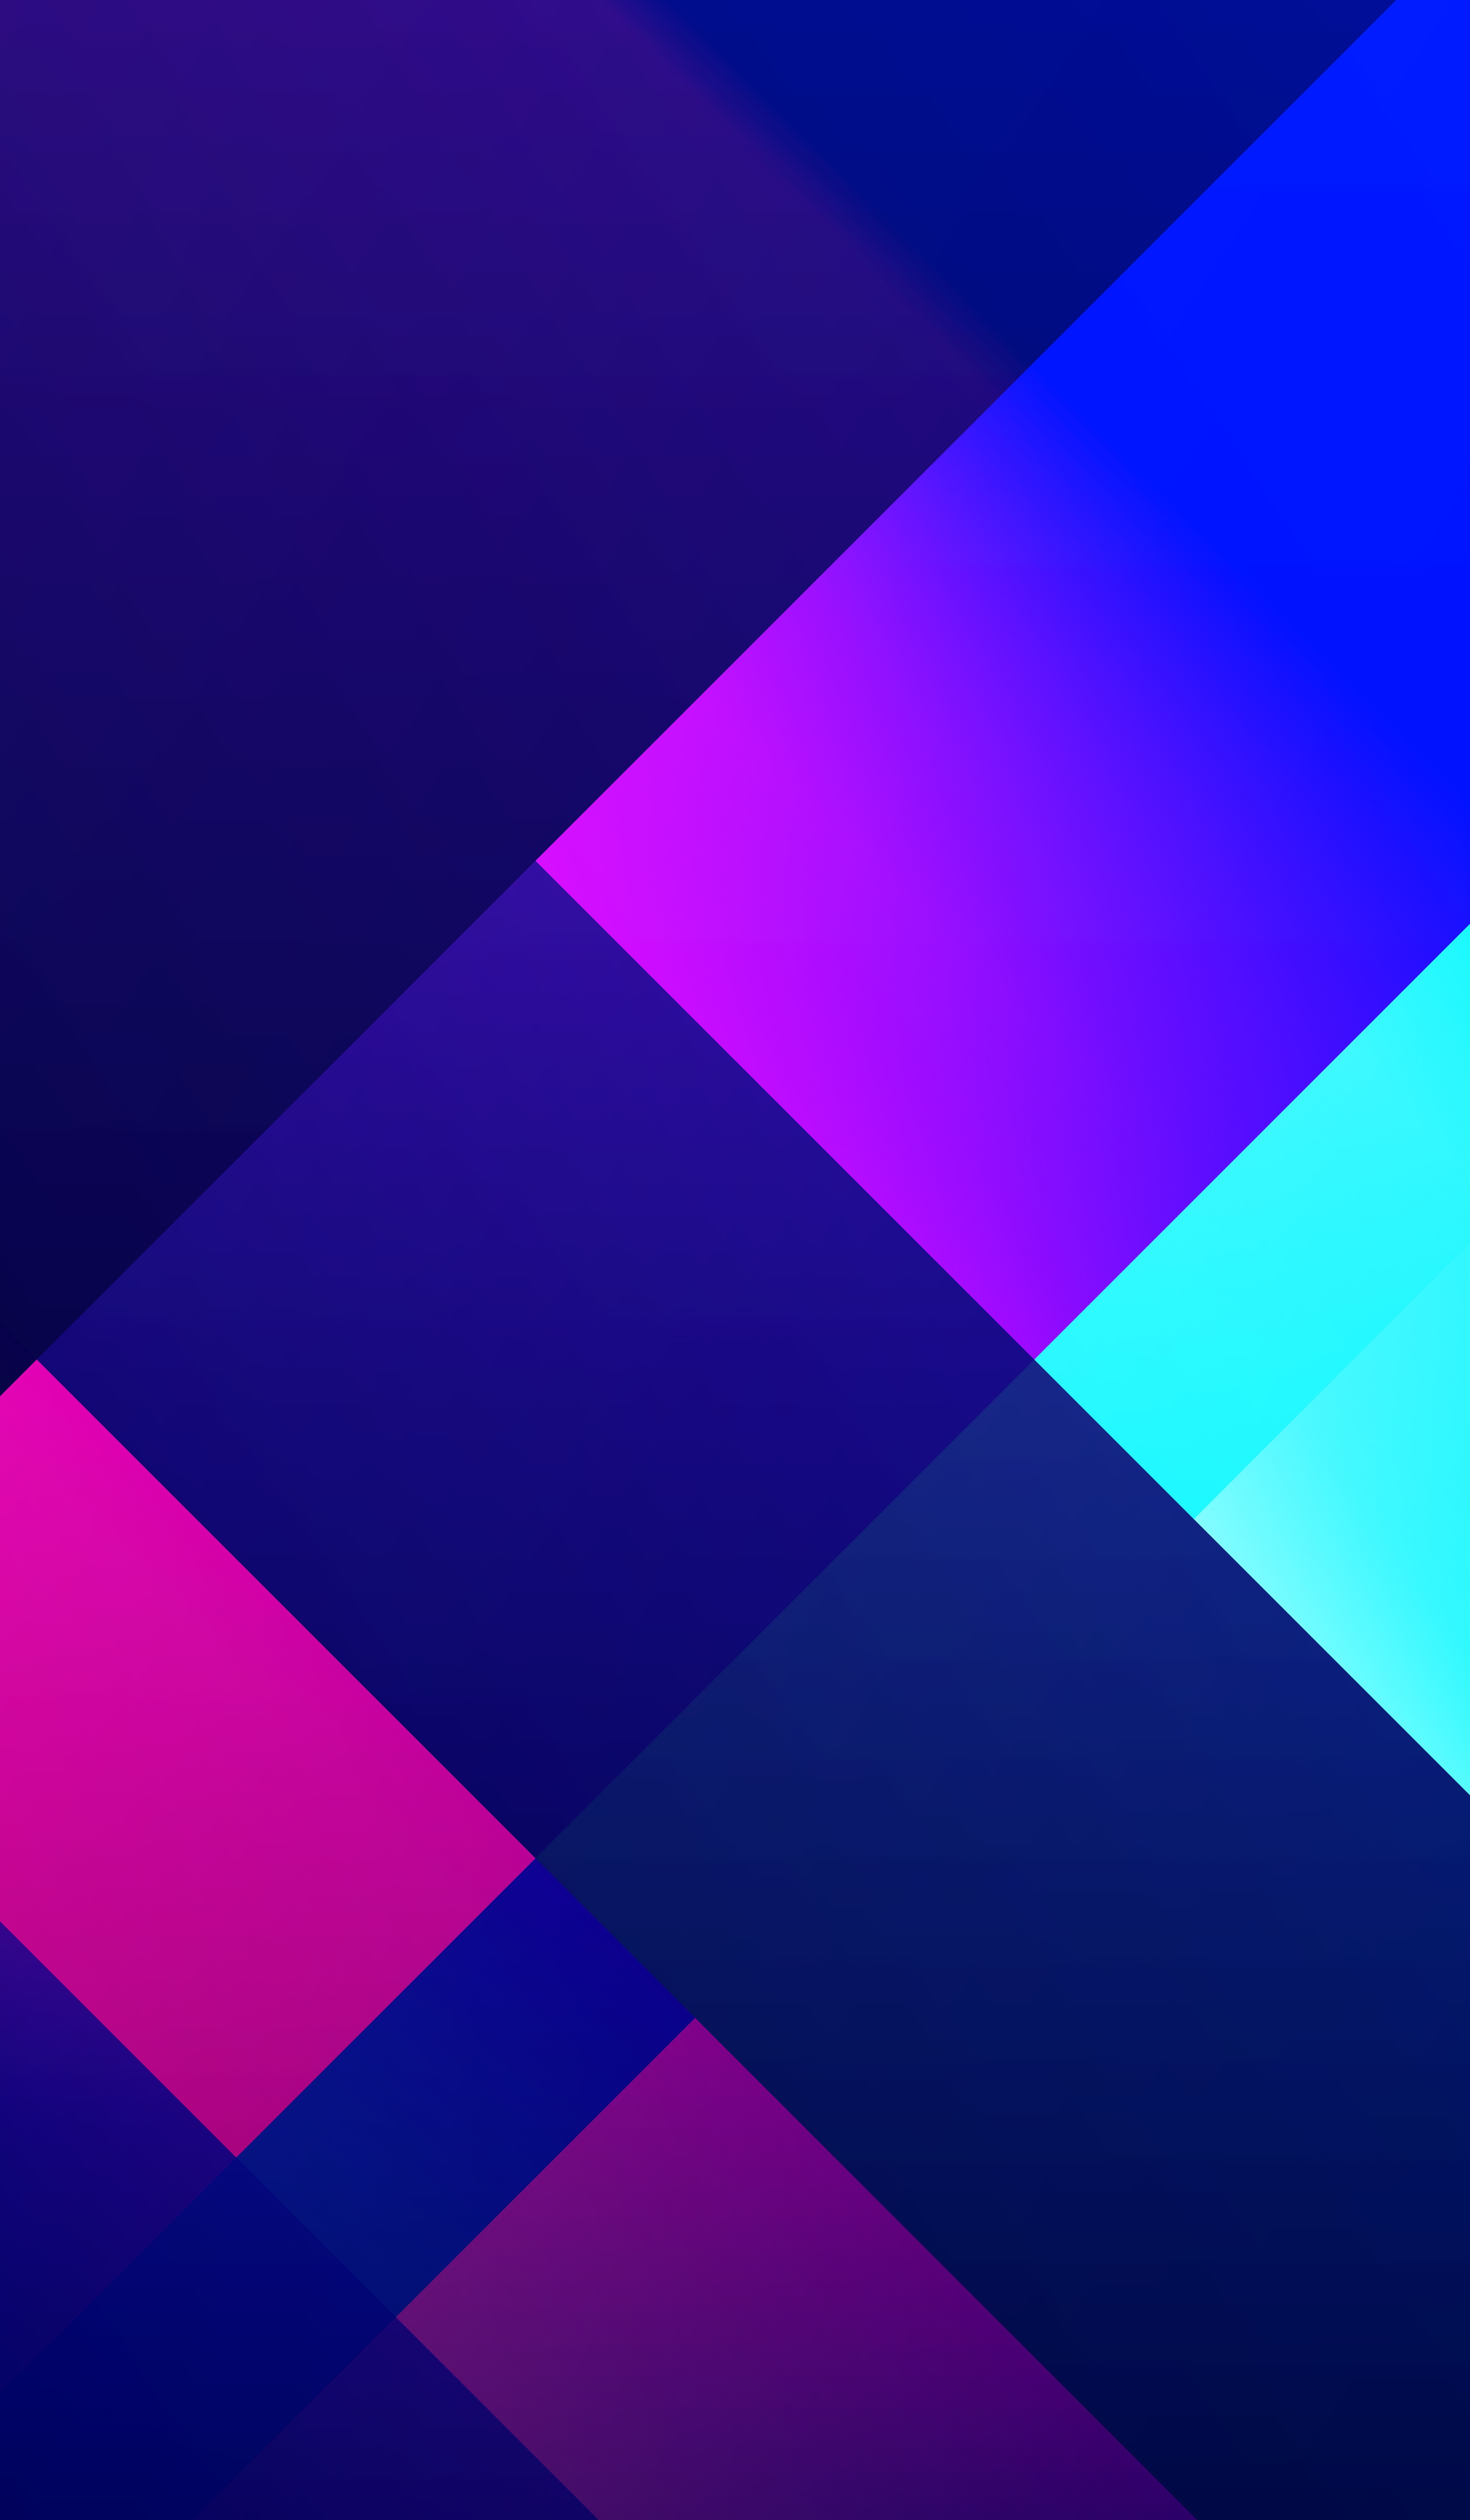 motley, geometry, gradient, abstract, multicolored iphone wallpaper